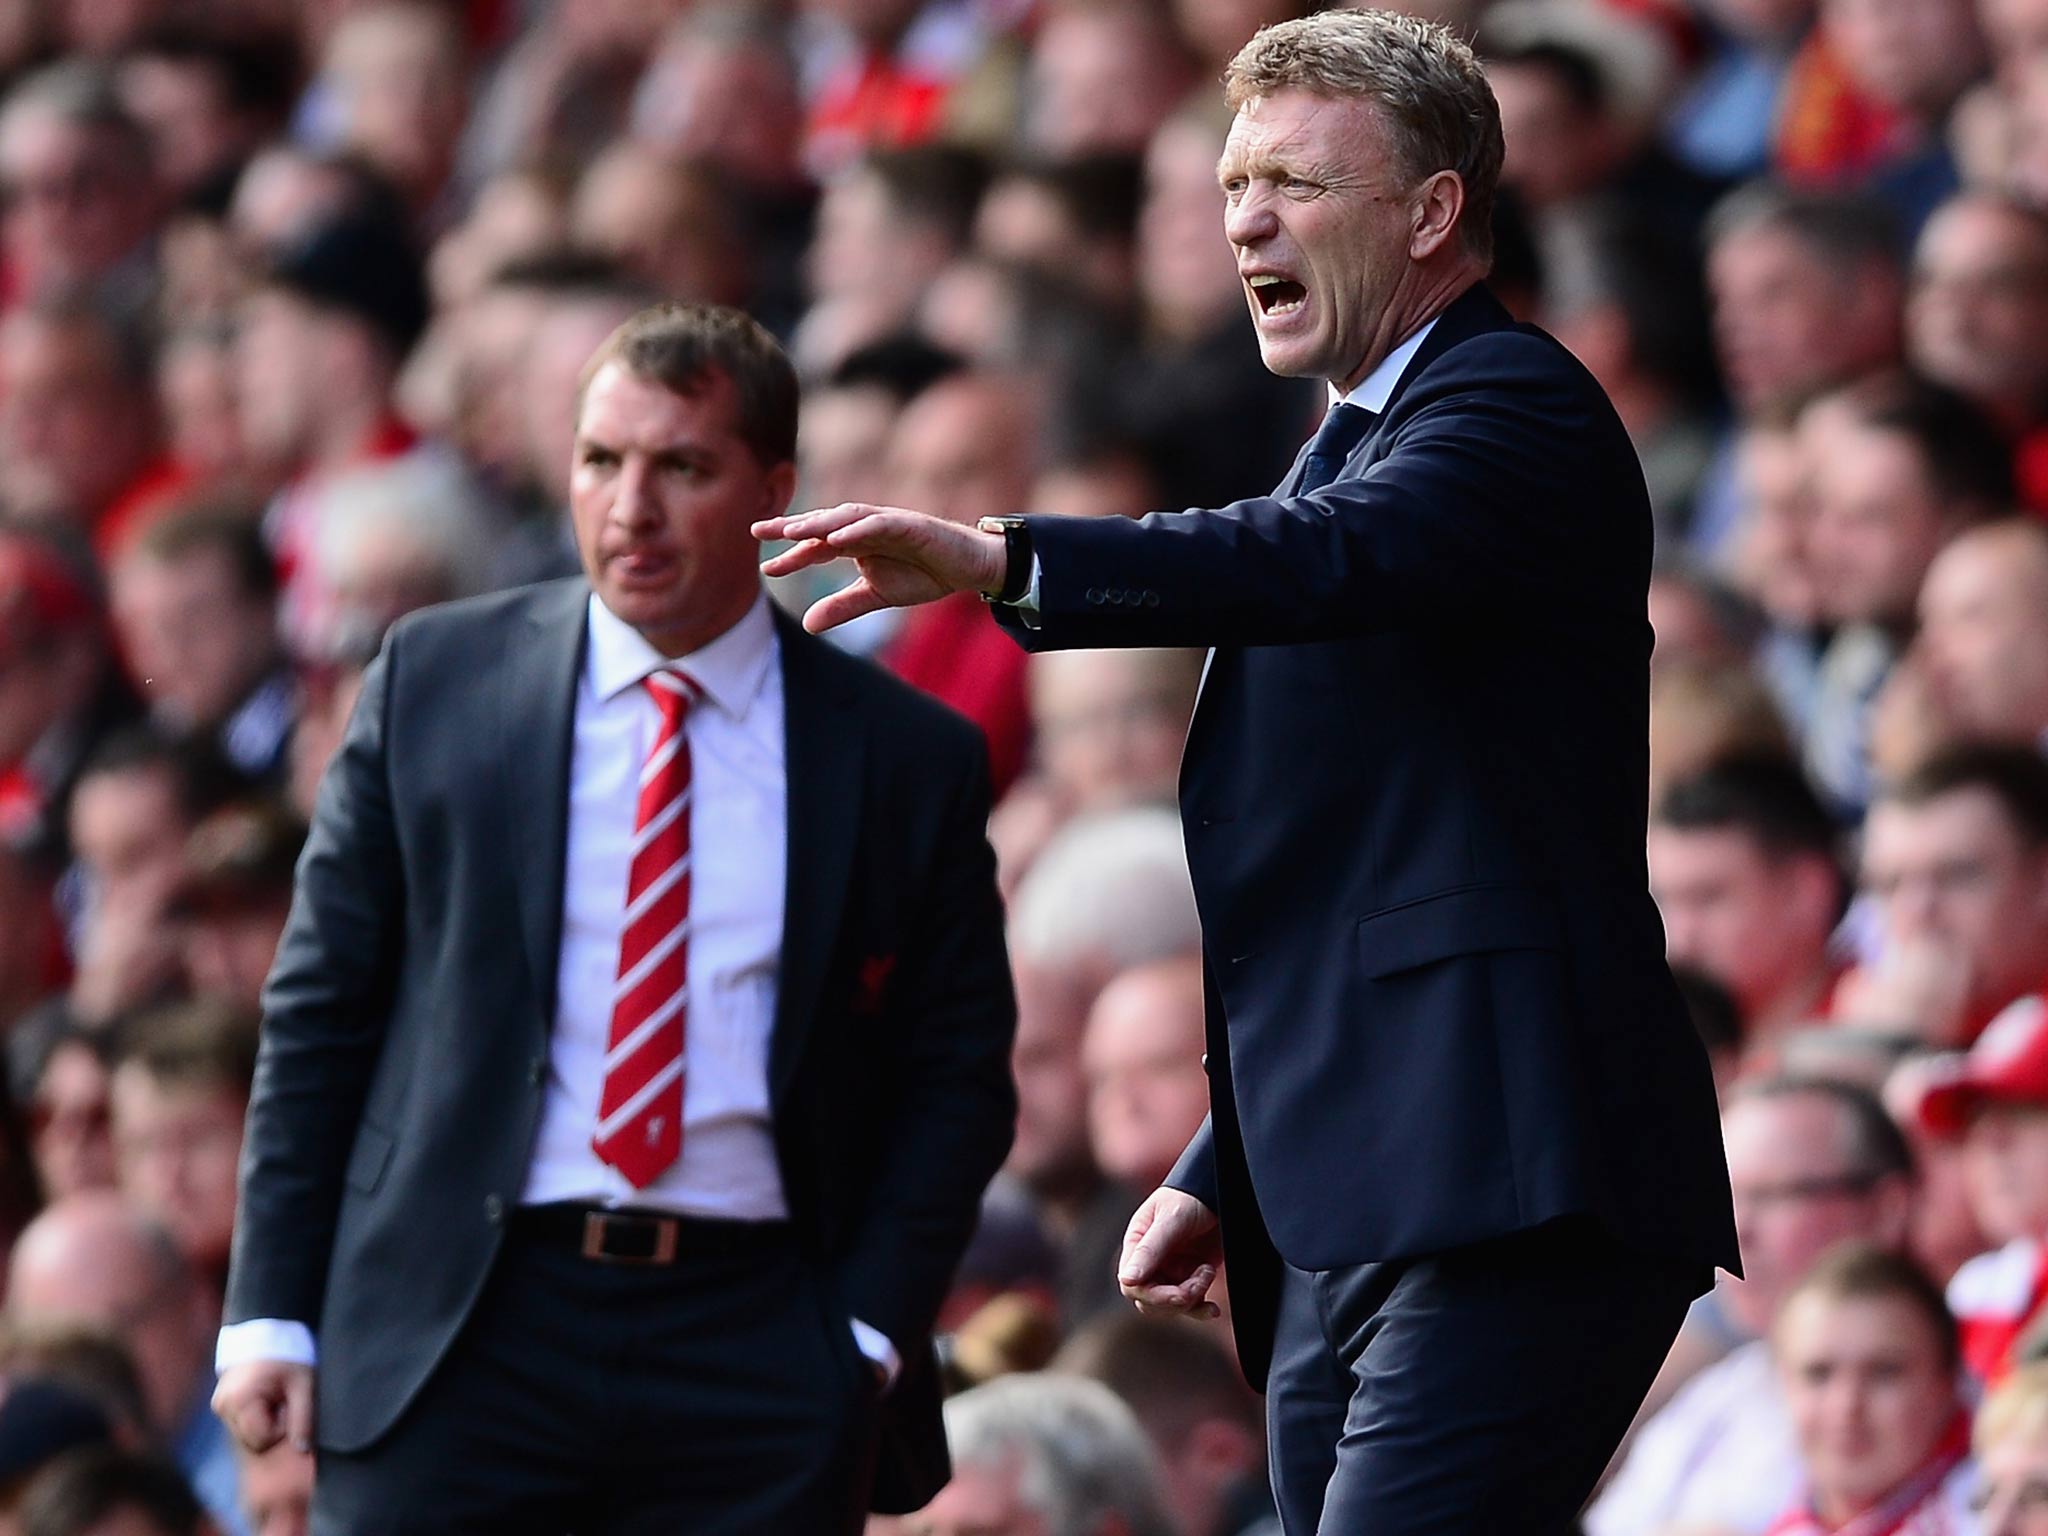 David Moyes gestures at his team while Brendan Rodgers looks on